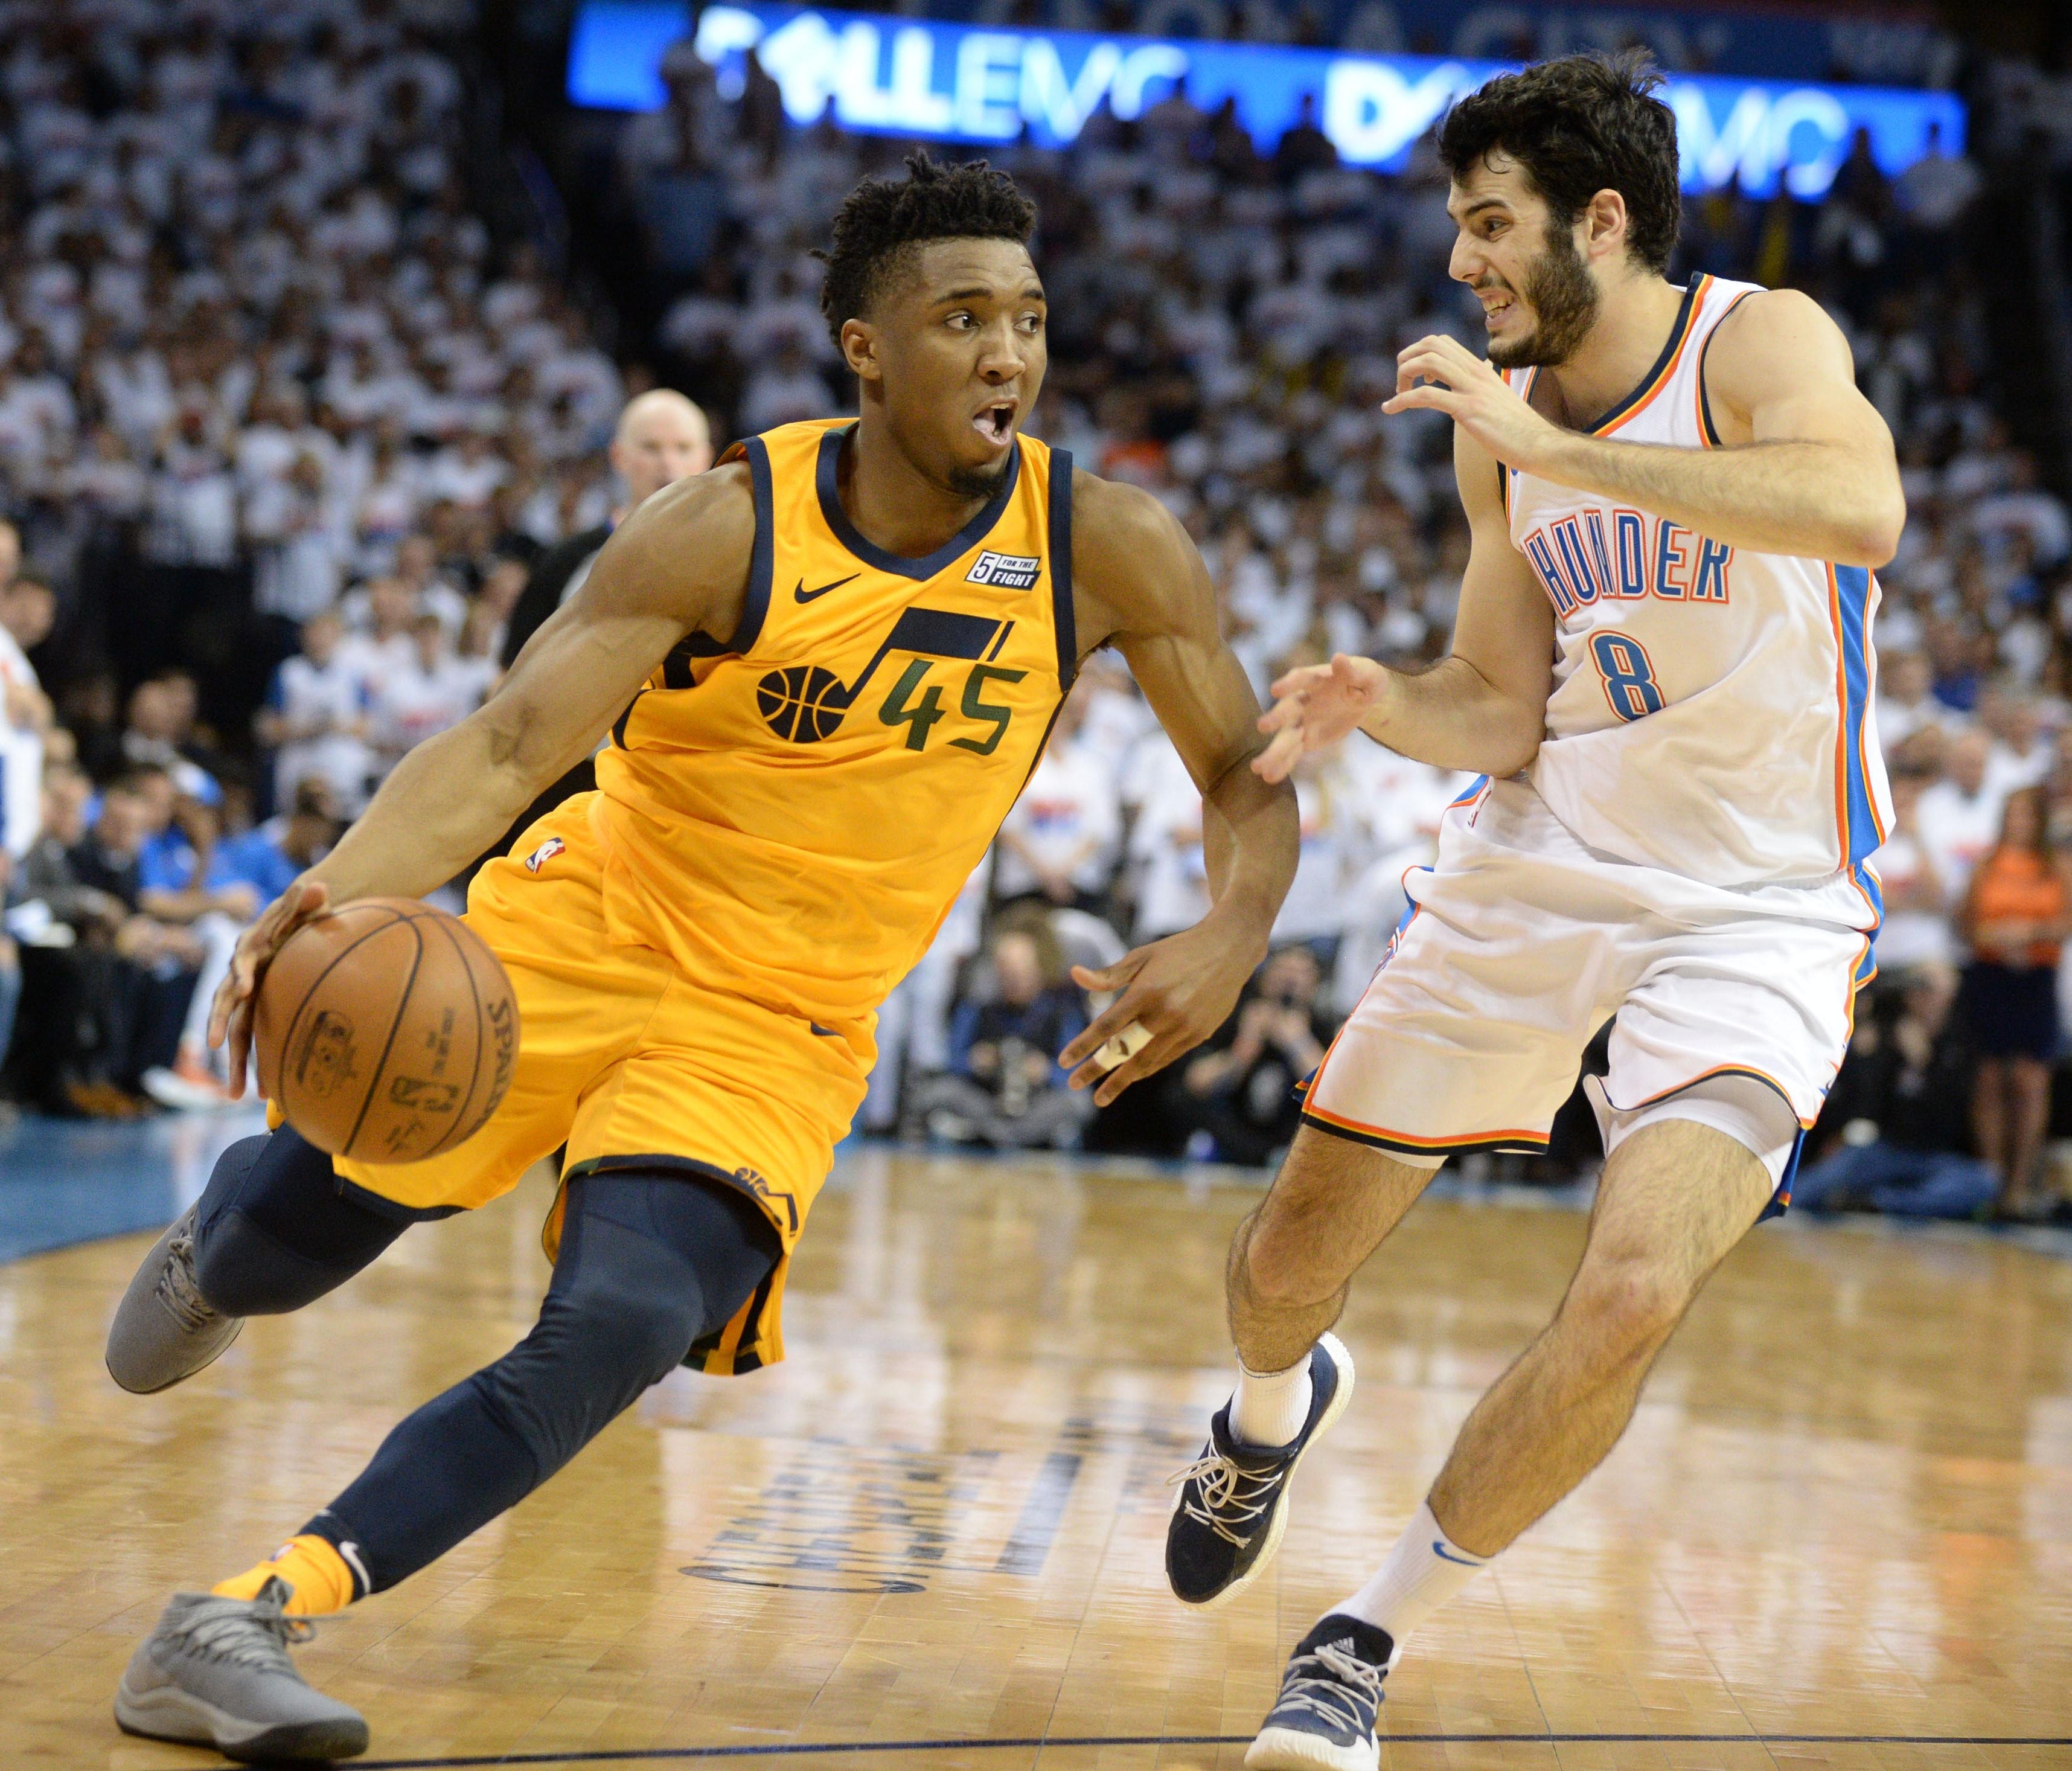 Utah Jazz guard Donovan Mitchell (45) dribbles the ball as Oklahoma City Thunder guard Alex Abrines (8) defends during the fourth quarter in game two of the first round of the 2018 NBA Playoffs at Chesapeake Energy Arena.